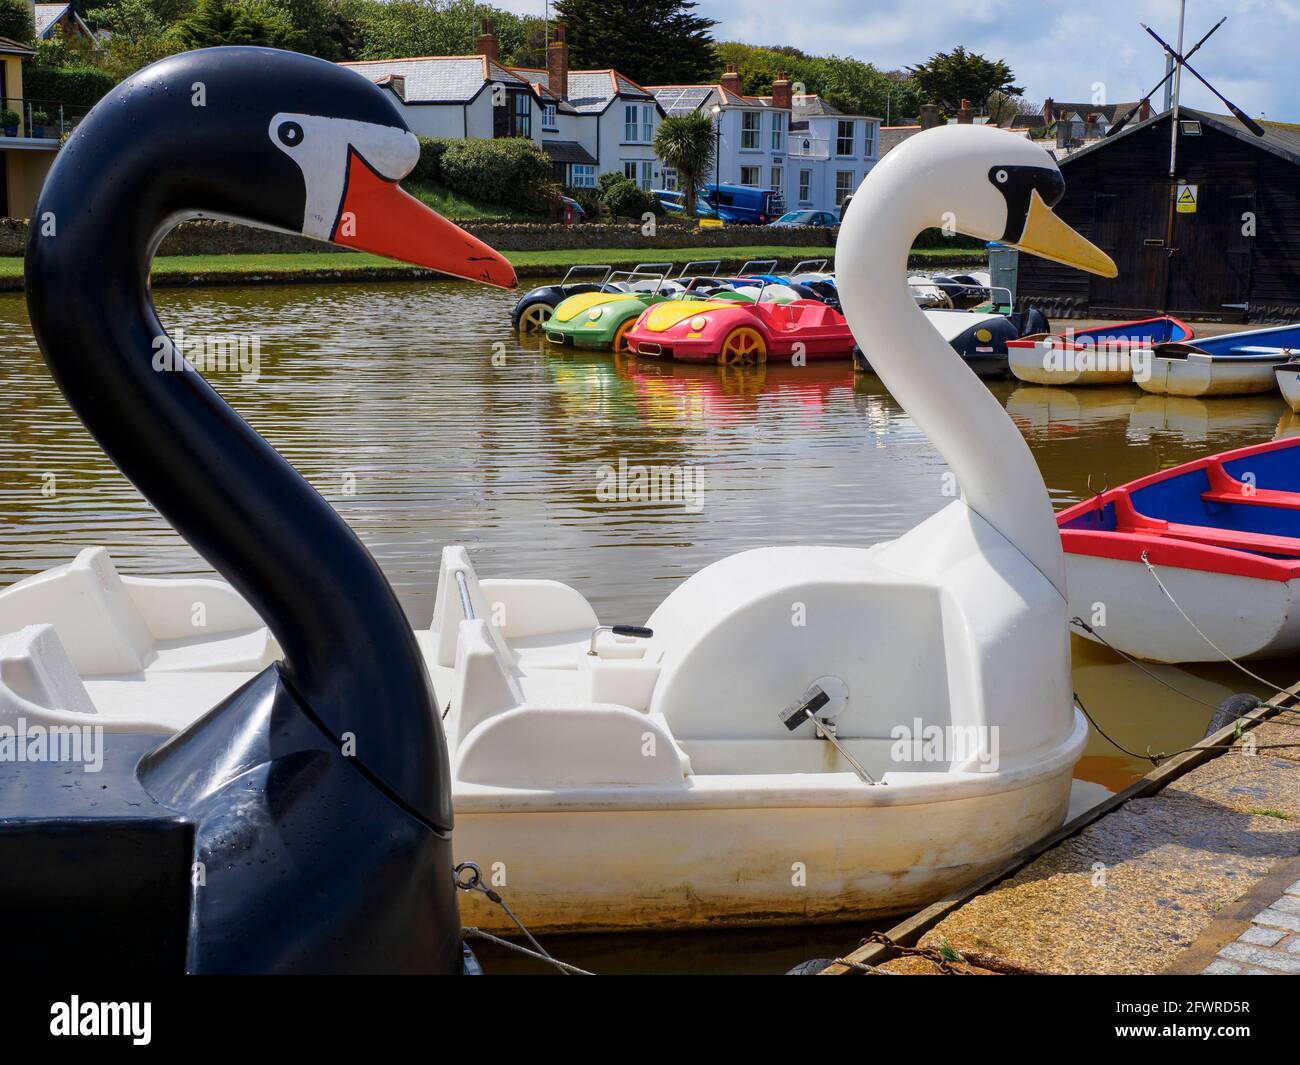 Pedalos on the canal, Bude, Cornwall, UK Stock Photo